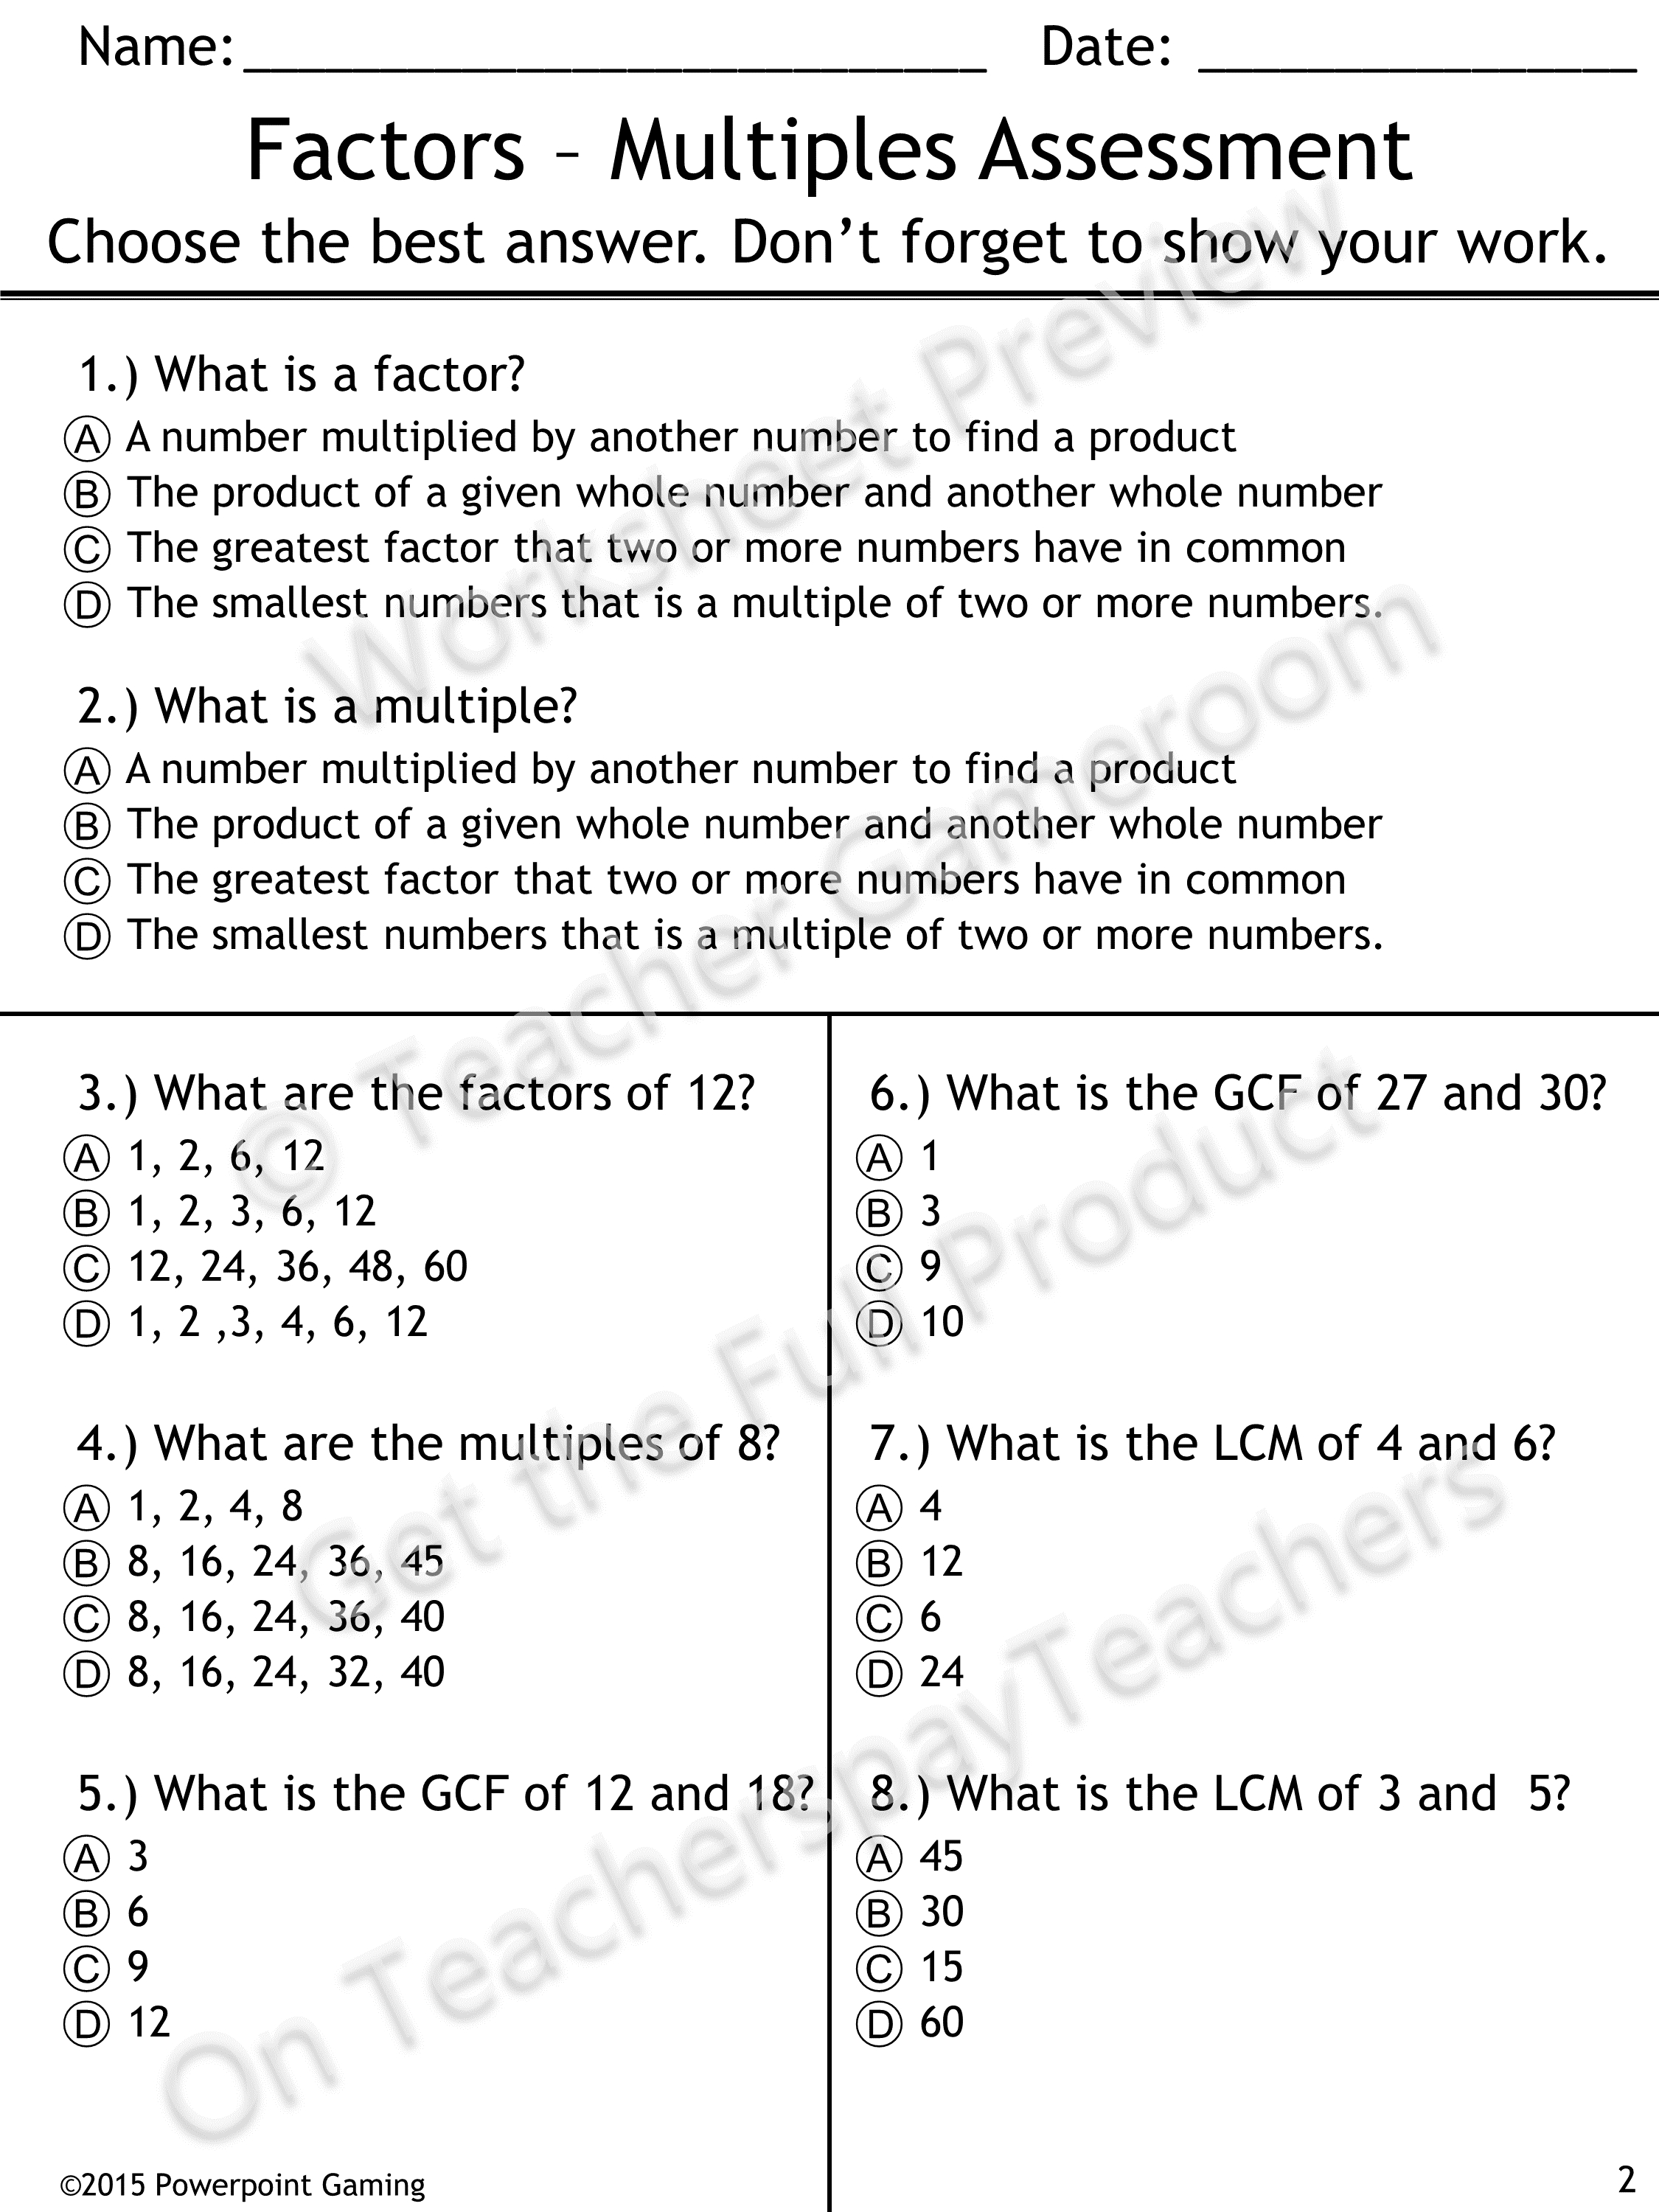 Greatest Common Factor Worksheets 6th Grade